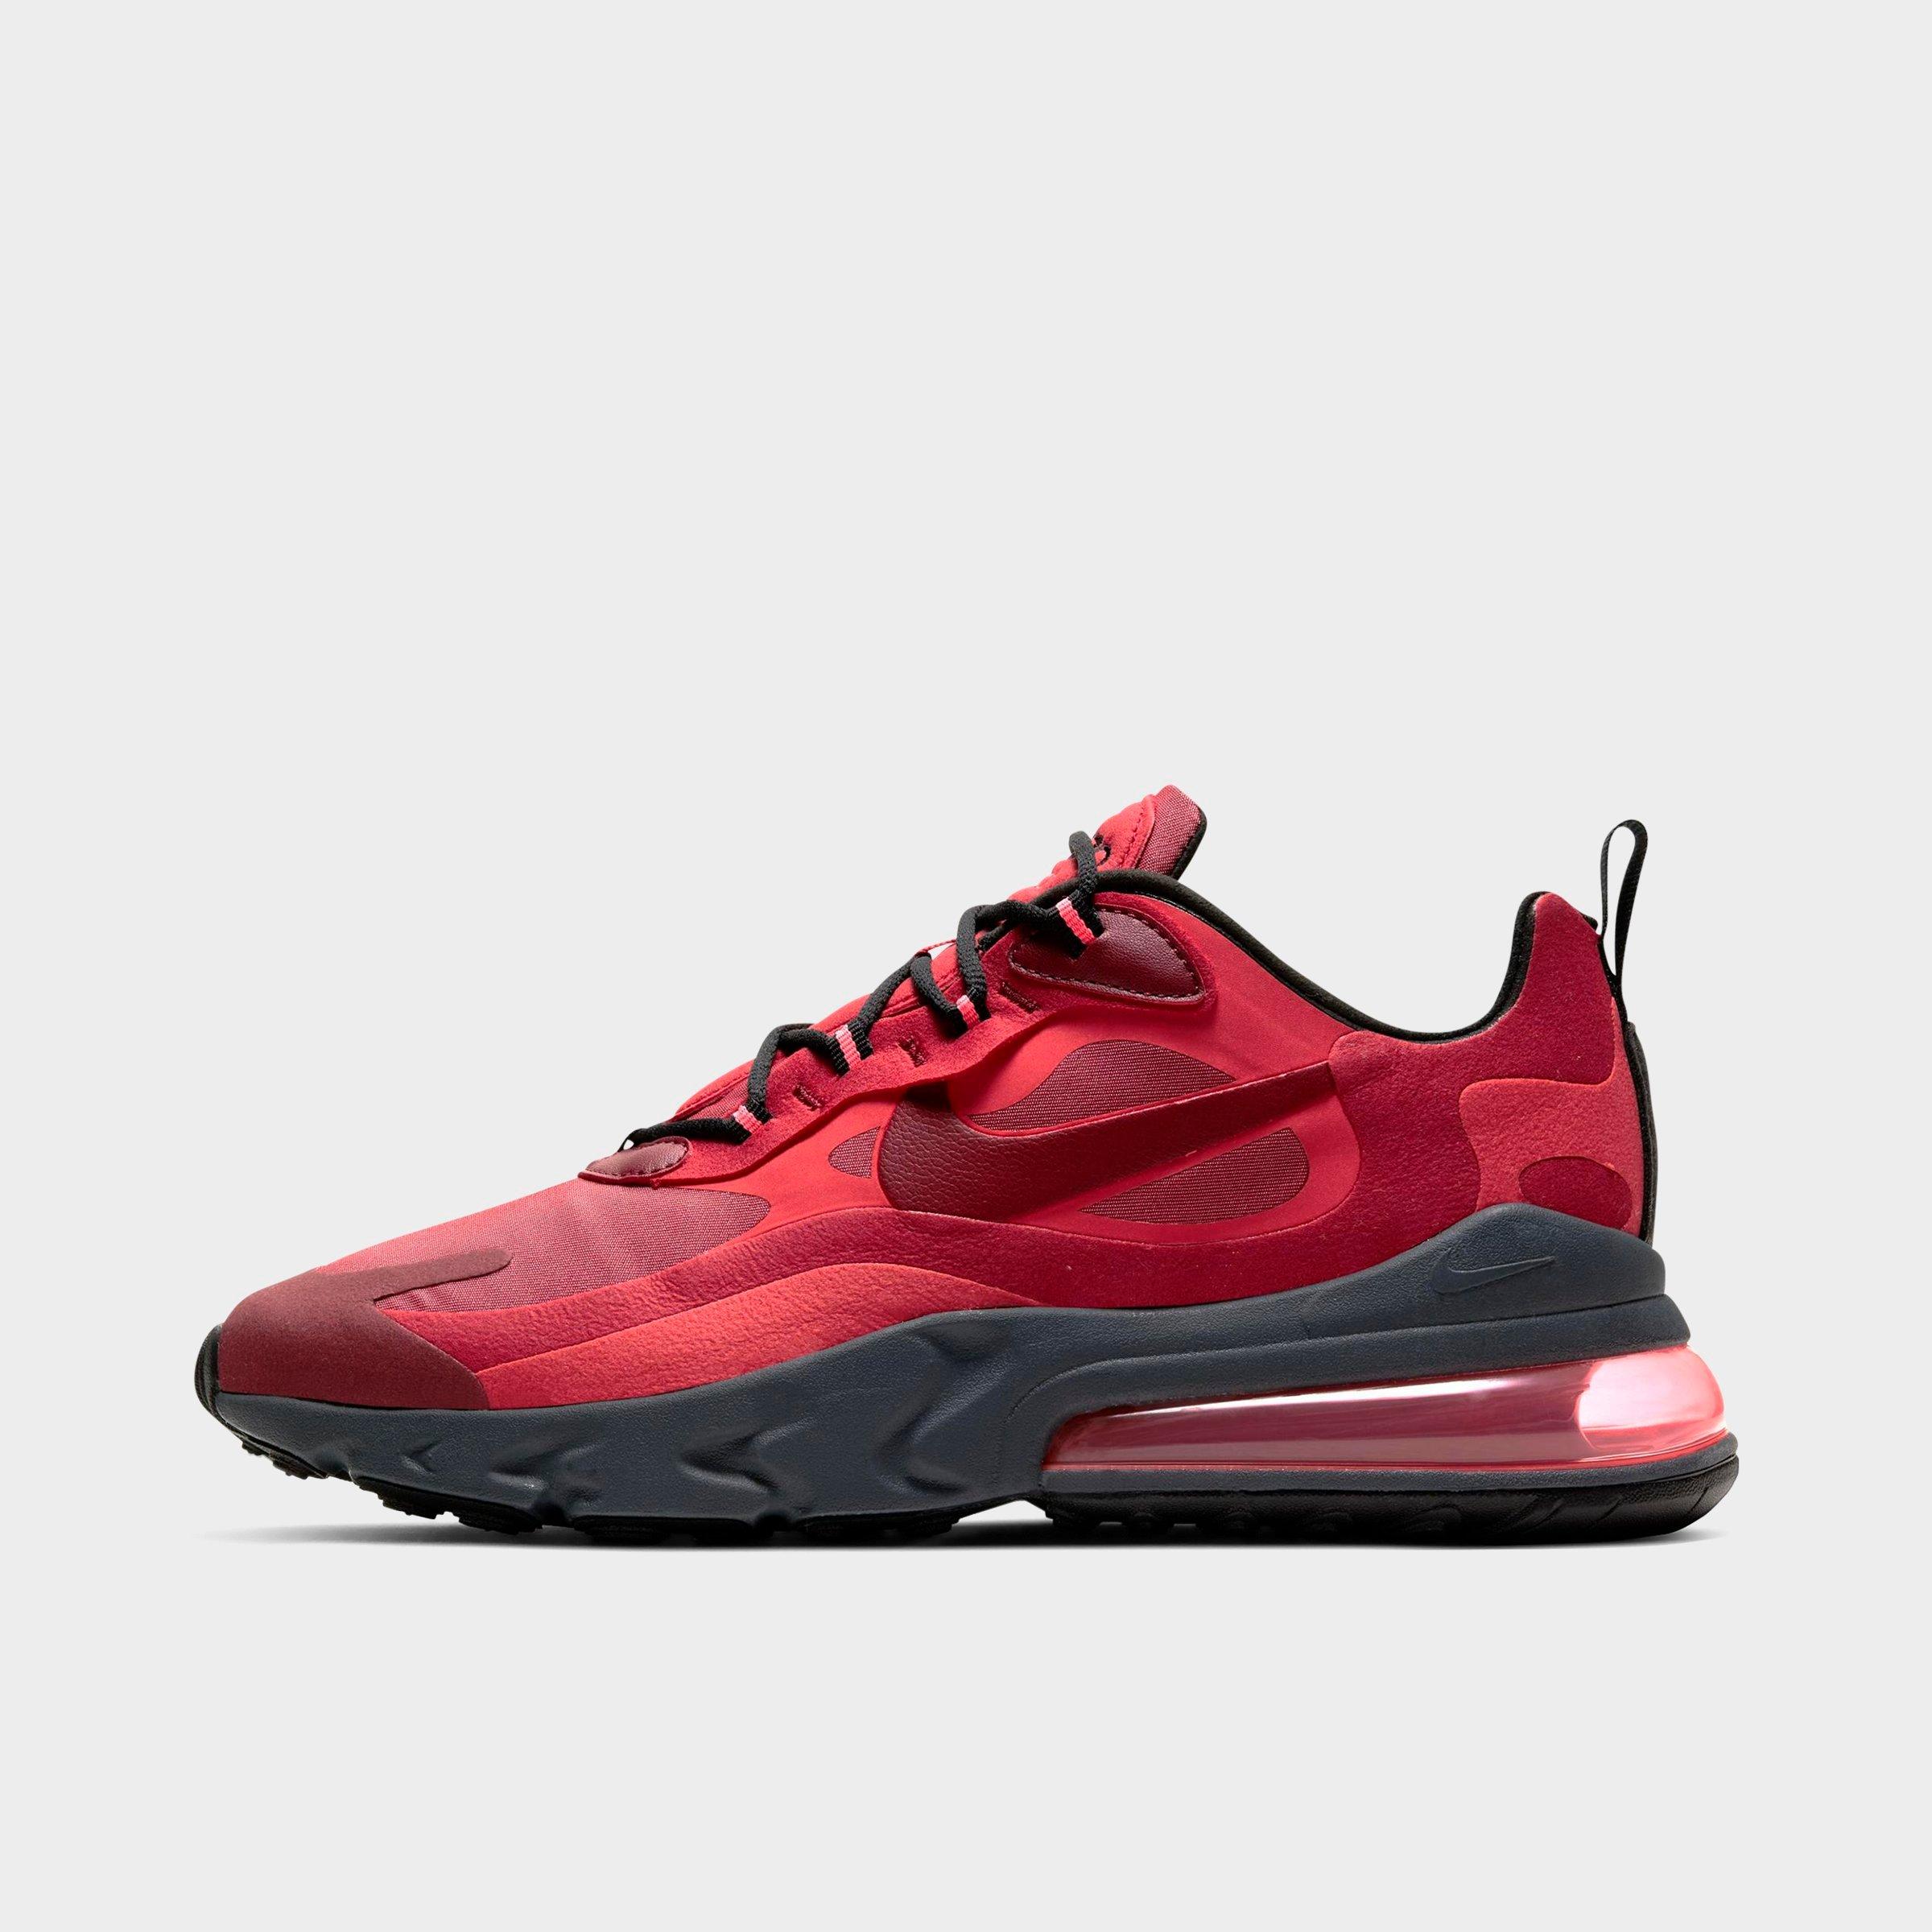 air max 270 good for working out